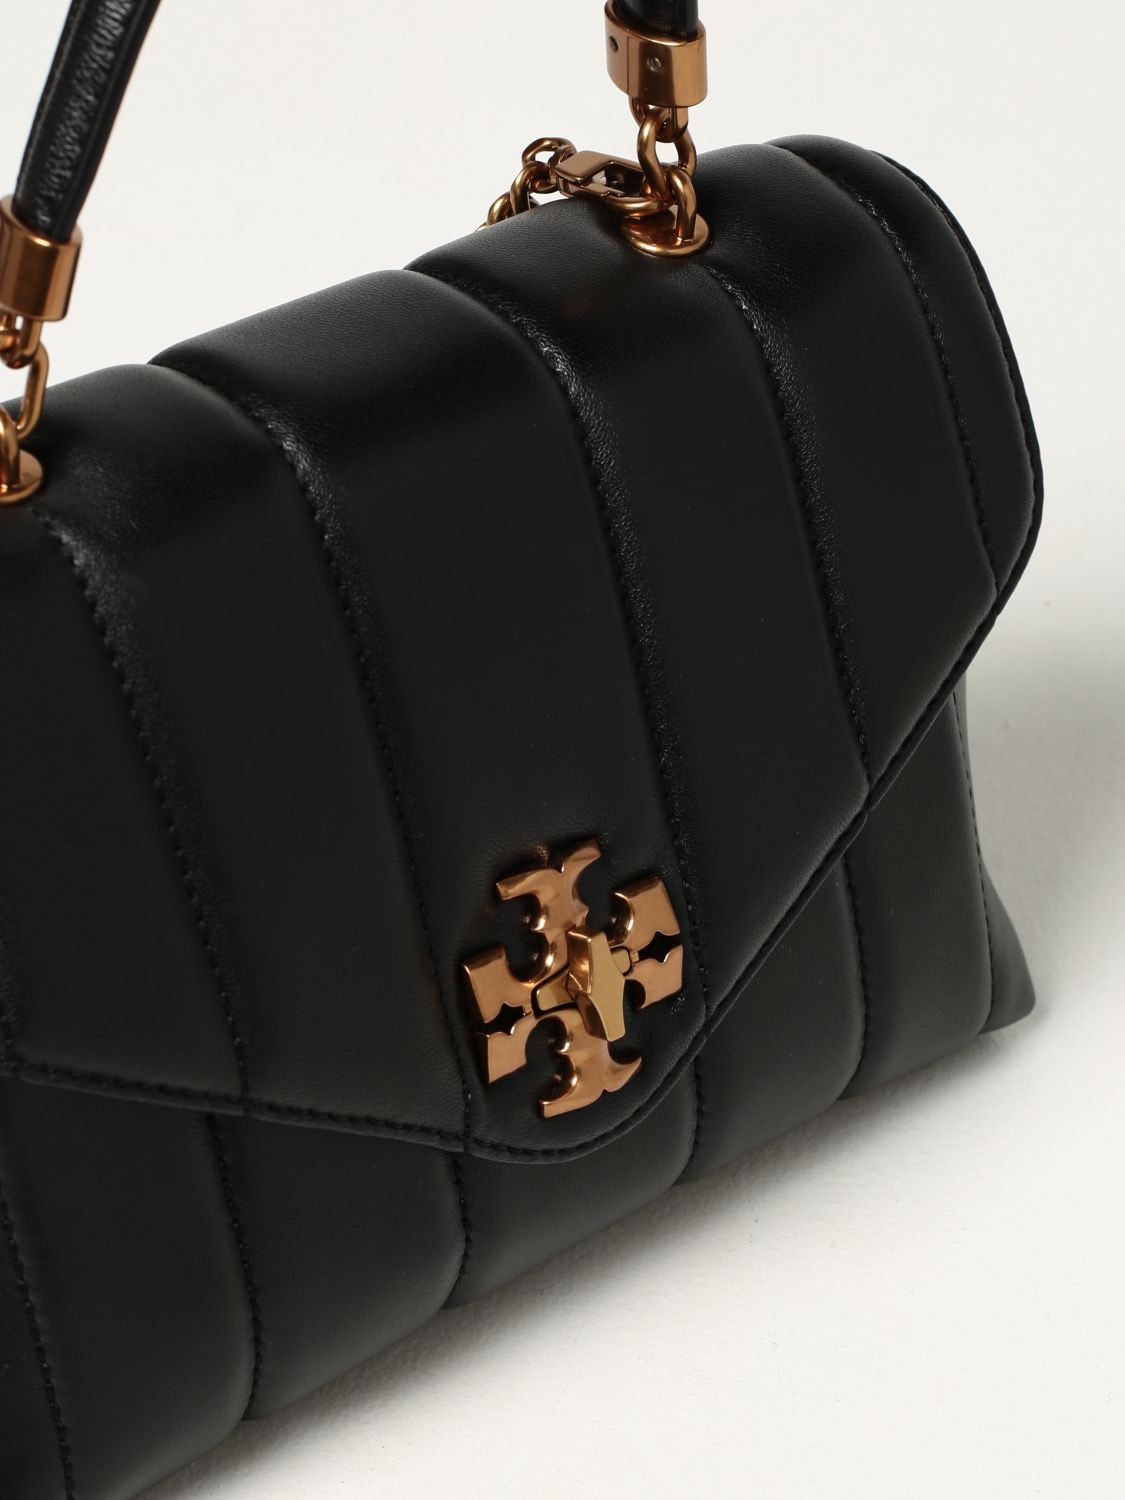 TORY BURCH: Kira bag in quilted leather - Black | Tory Burch handbag 83943  online on 